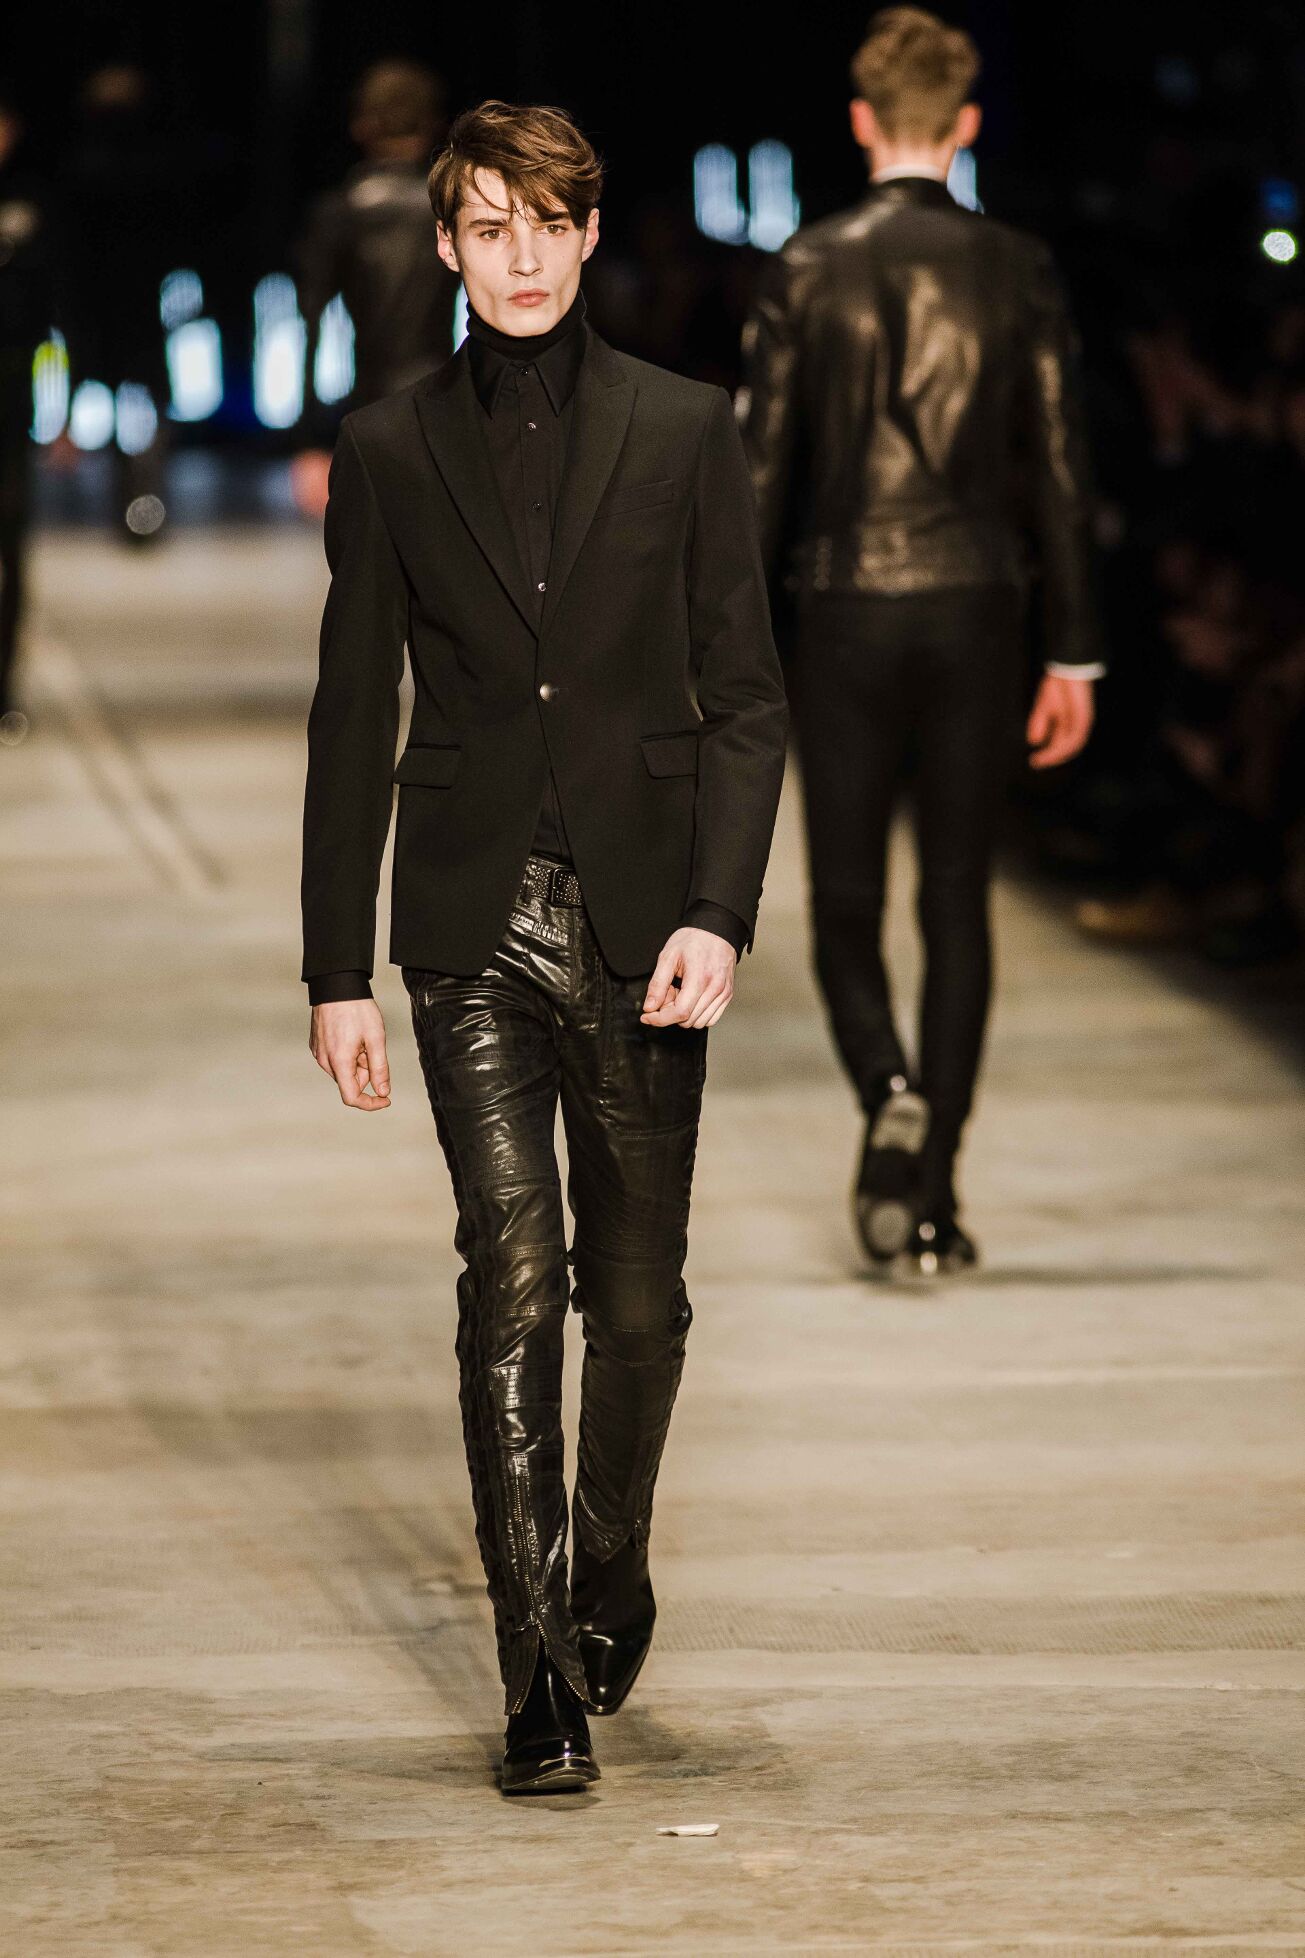 DIESEL BLACK GOLD FALL WINTER 2014 MEN'S COLLECTION - PITTI UOMO | The ...